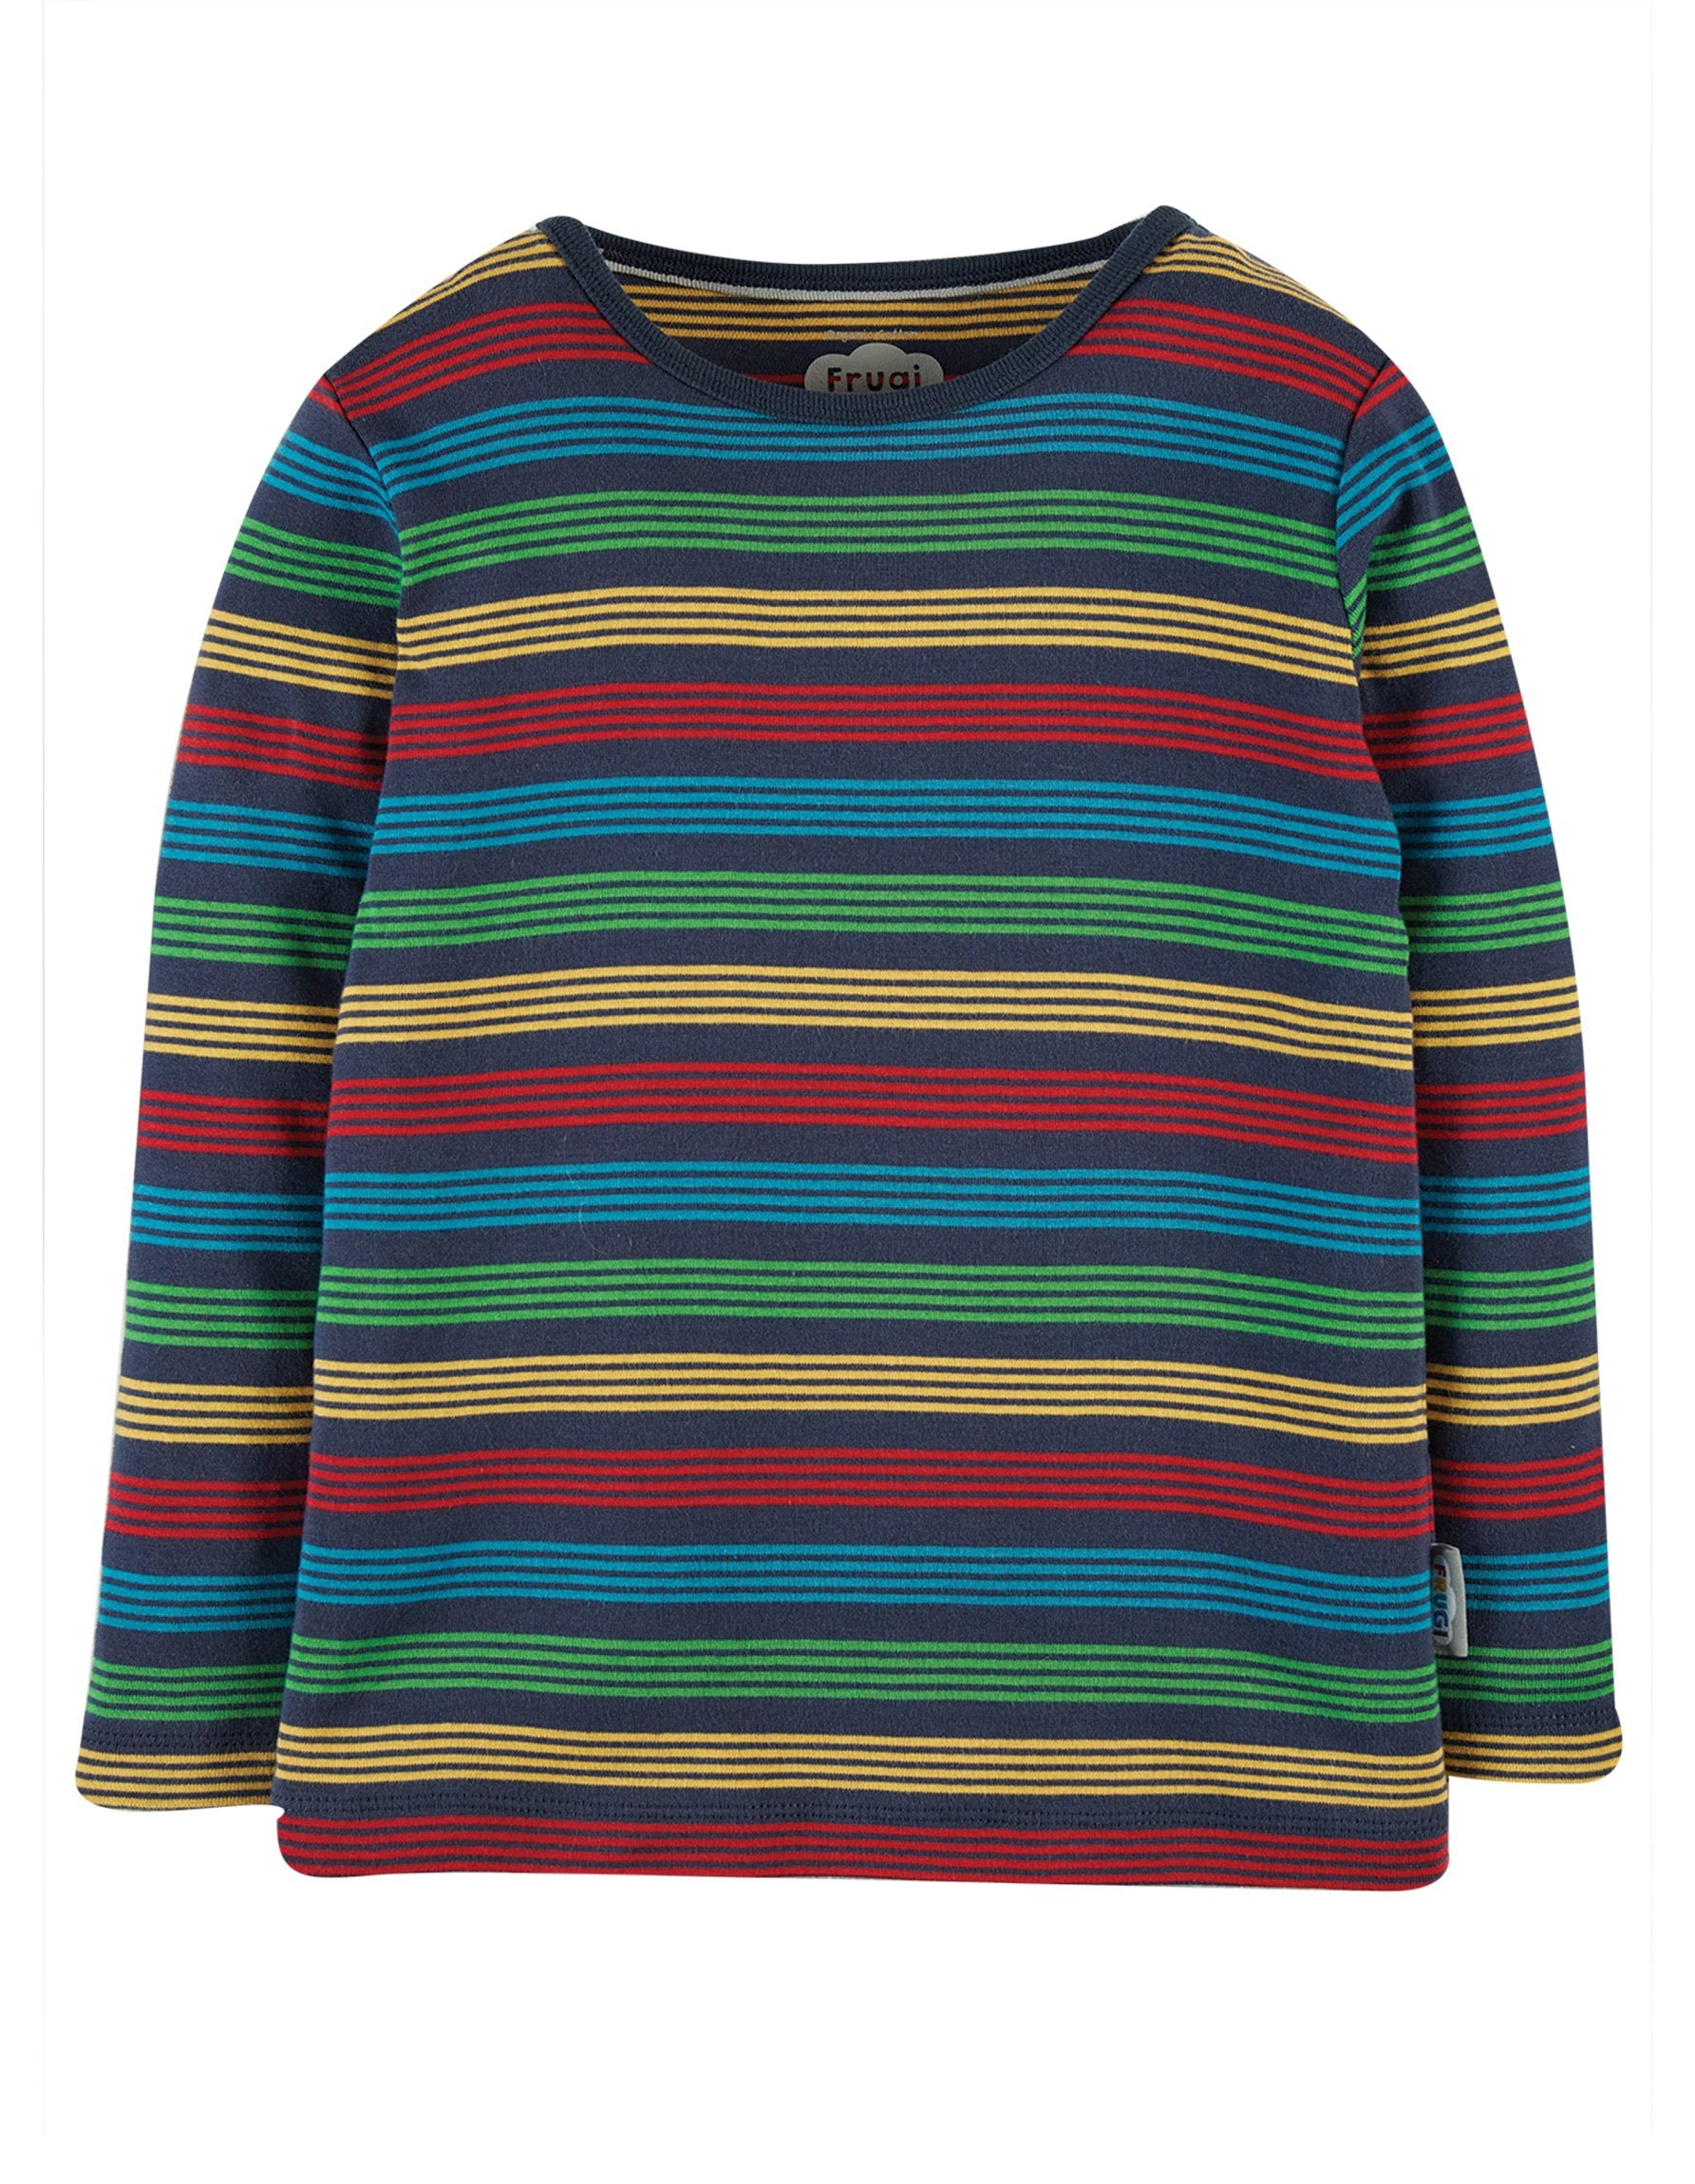 New Release Frugi Favourite Long Sleeve T-Shirt Tobermory Rainbow Stripe - The Thrifty Stork